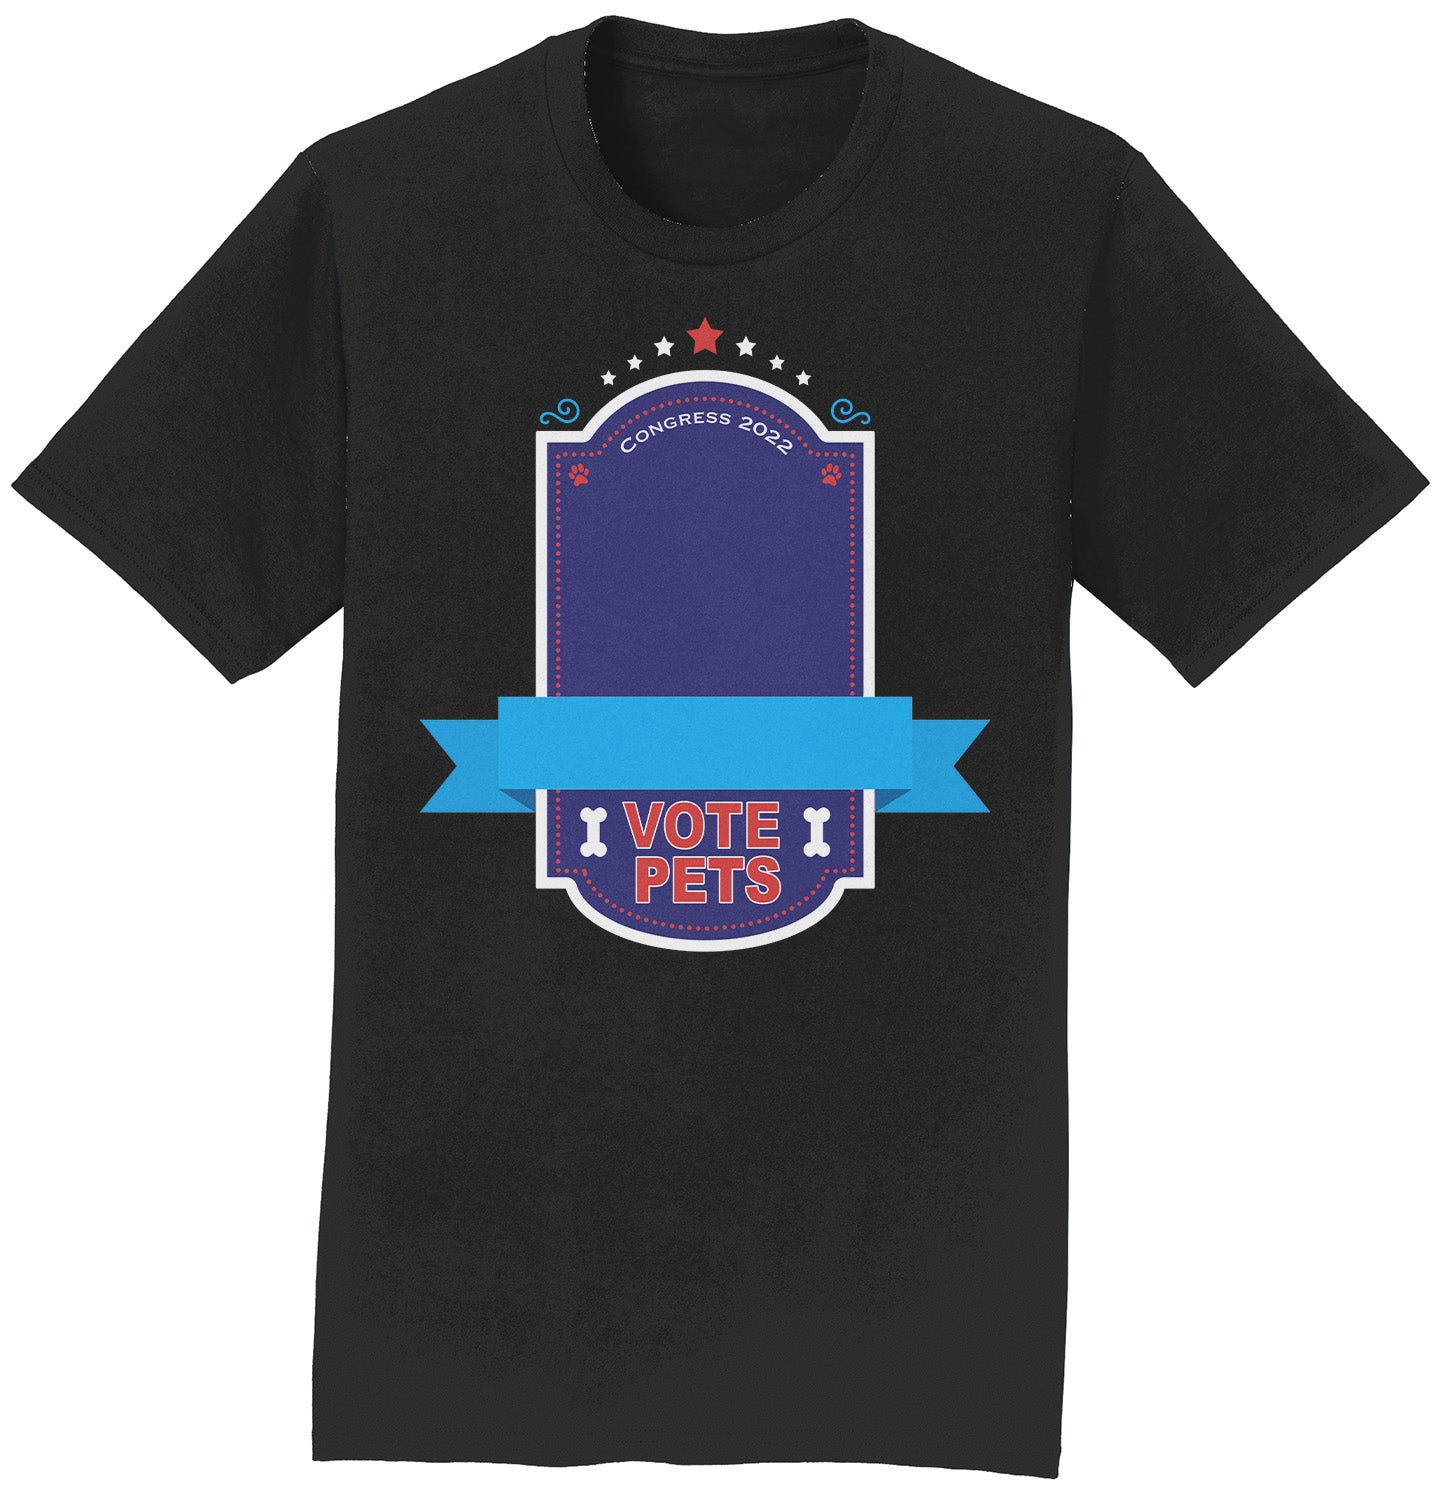 Vote Pets Candidate - Personalized Custom Adult Unisex T-Shirt